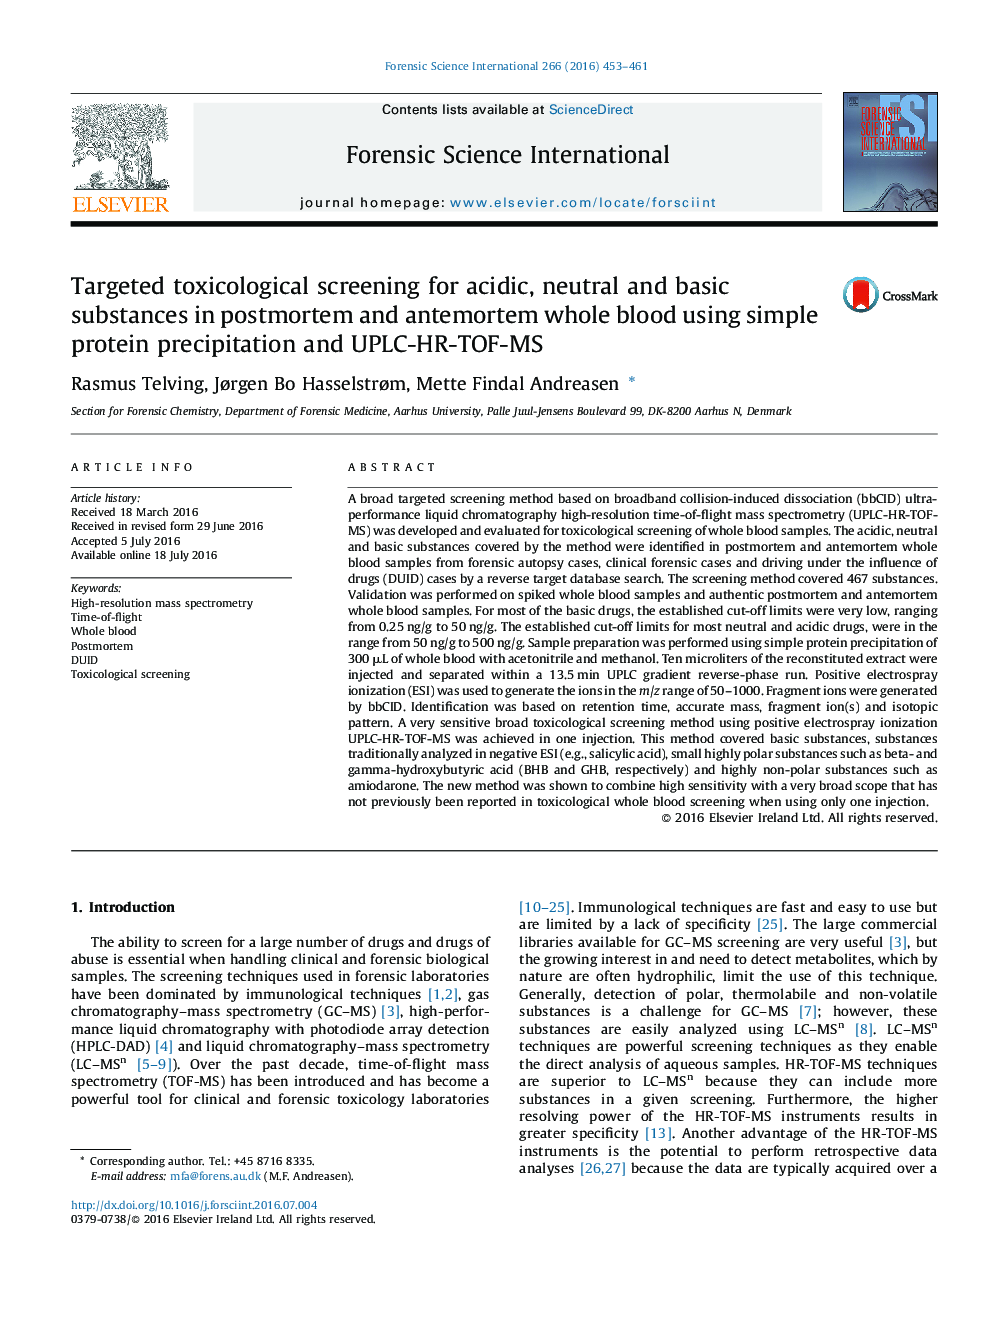 Targeted toxicological screening for acidic, neutral and basic substances in postmortem and antemortem whole blood using simple protein precipitation and UPLC-HR-TOF-MS